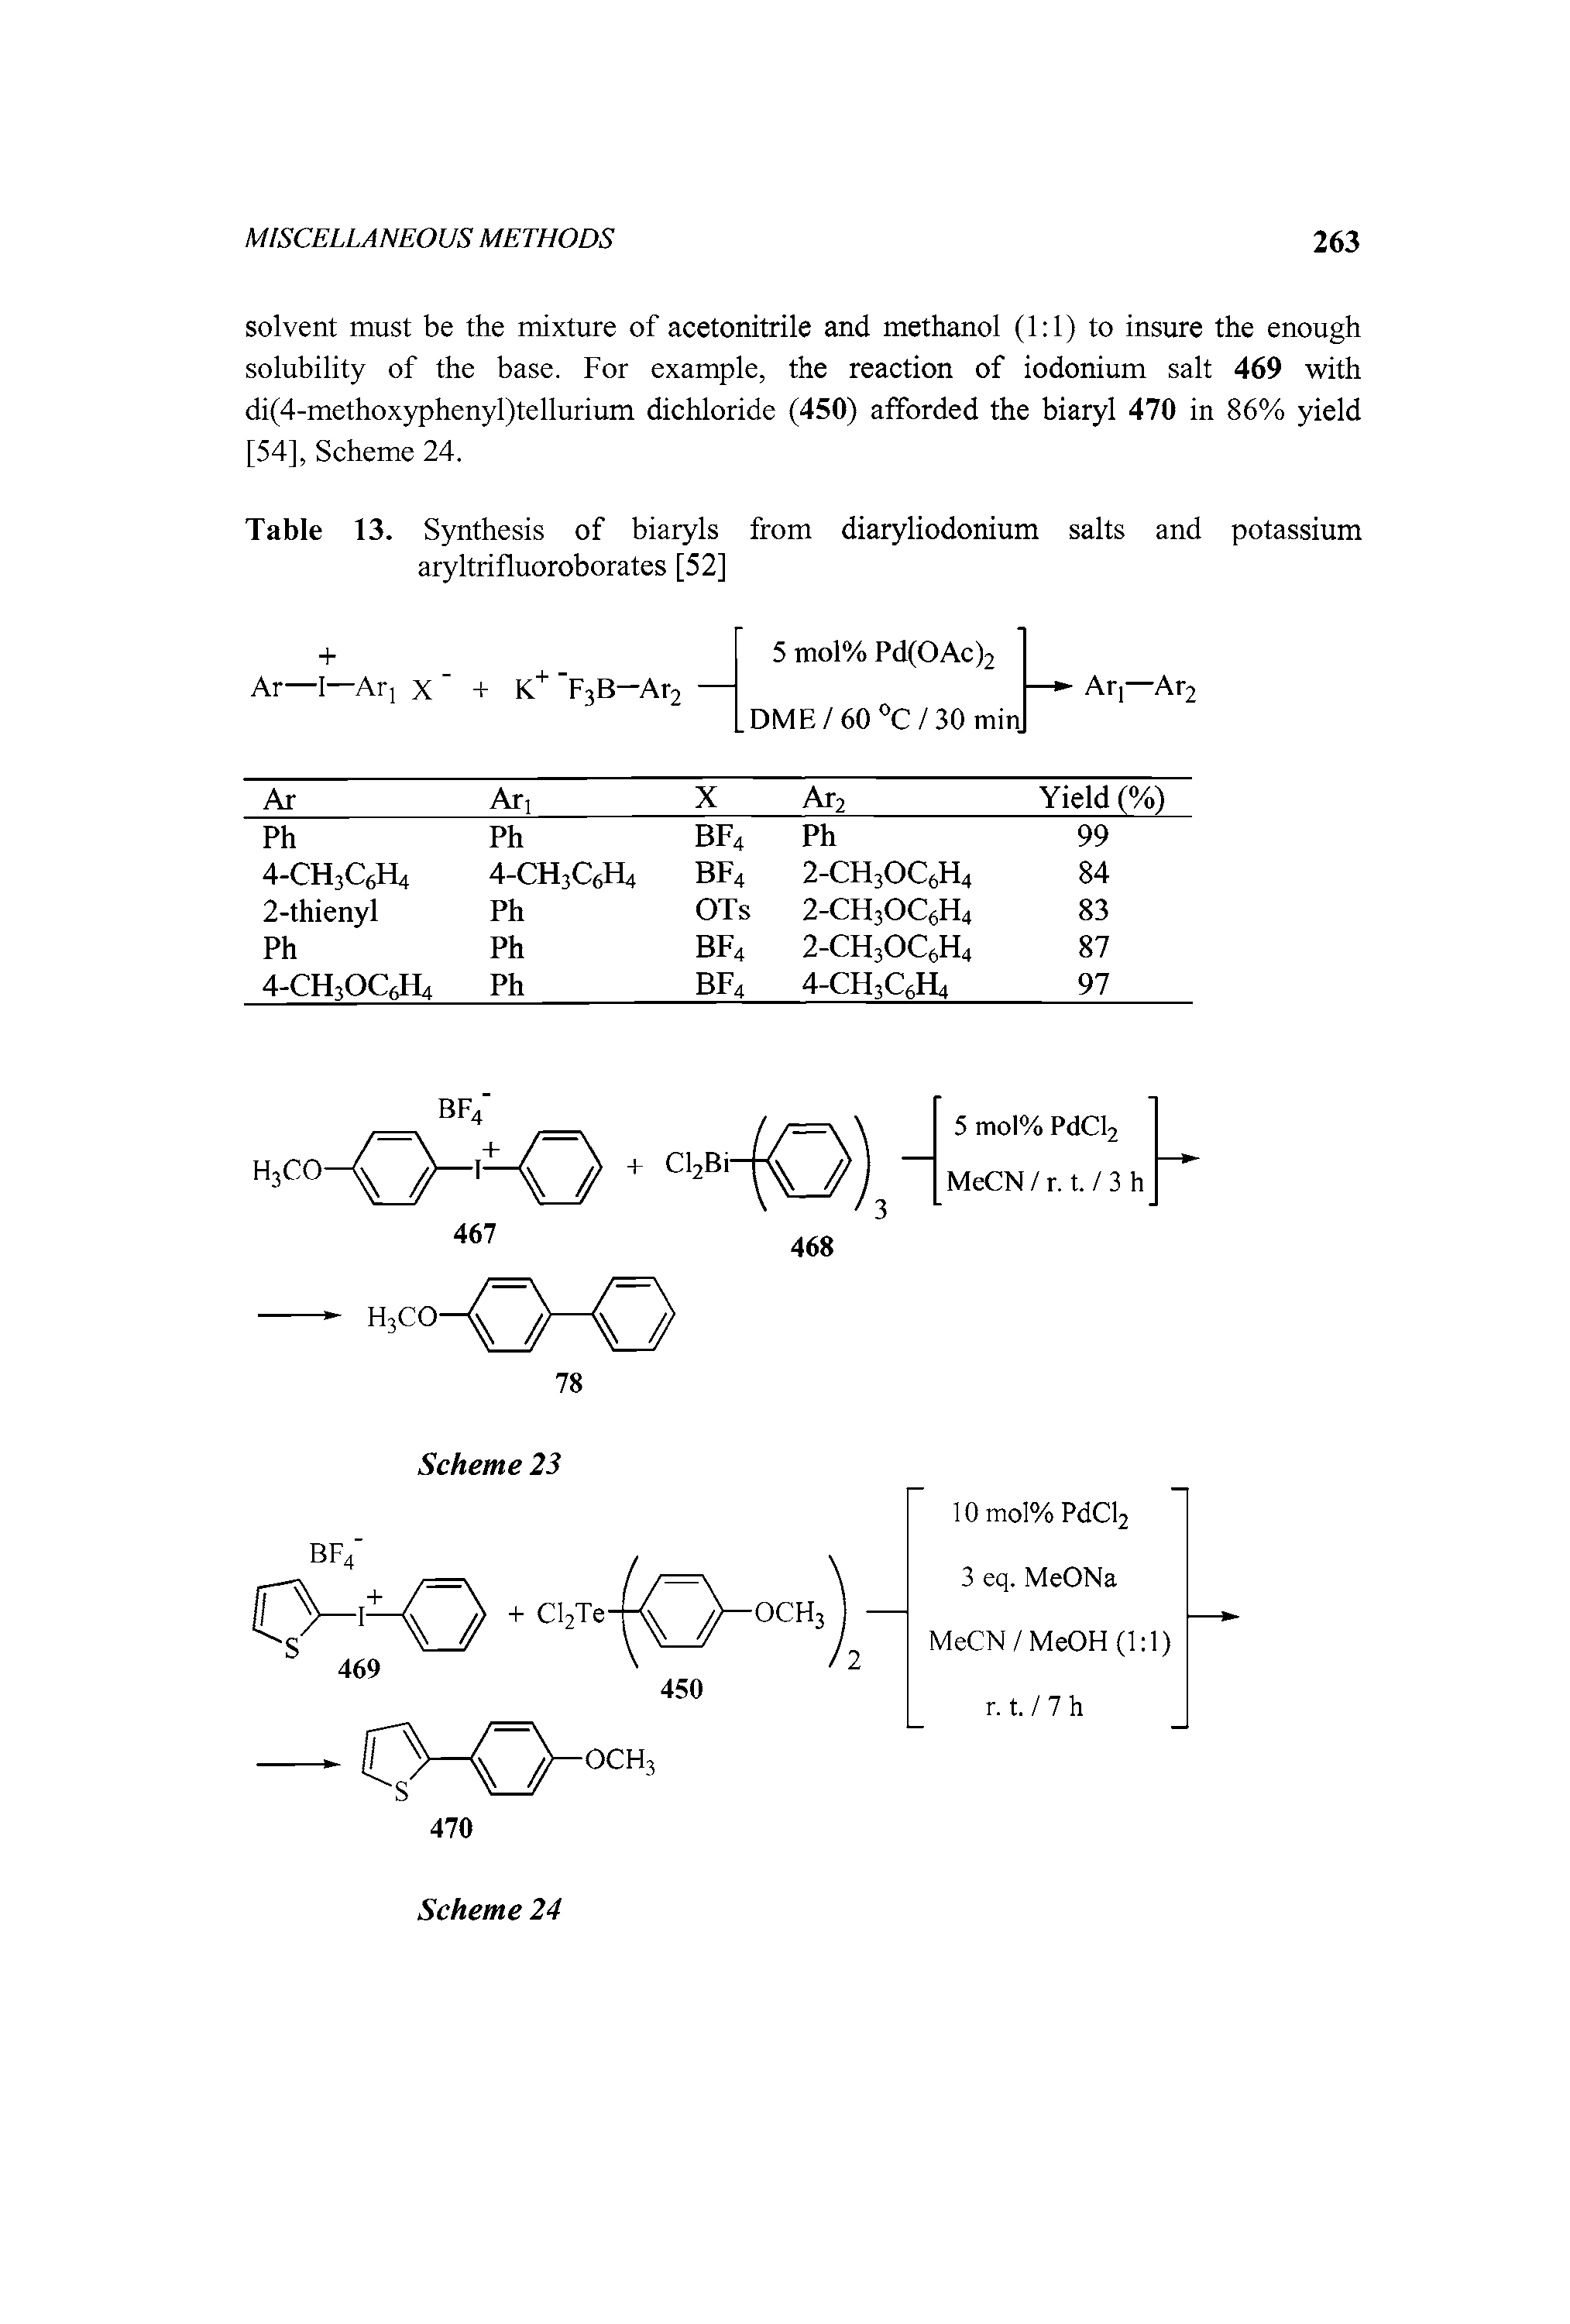 Table 13. Synthesis of biatyls from diaryliodonium salts and potassium aryltrifluoroborates [52]...